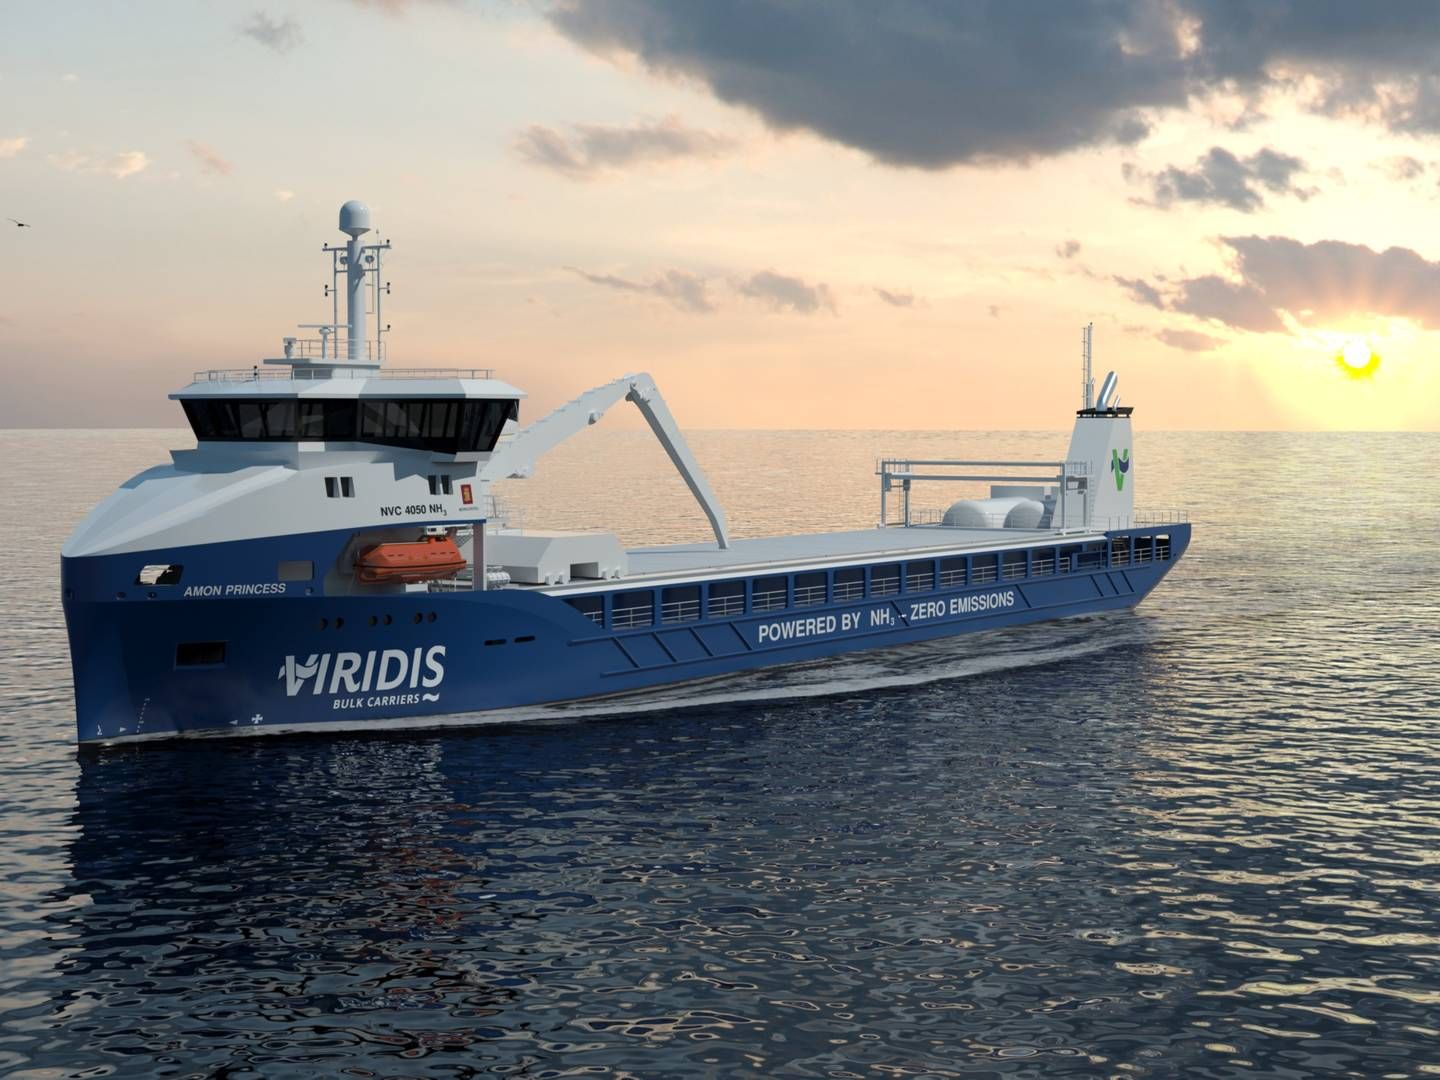 The company's planned ammonia vessels are expected to be ordered in 2023 and delivered from 2025. | Photo: Kongsberg Maritime / Viridis Bulk Carriers